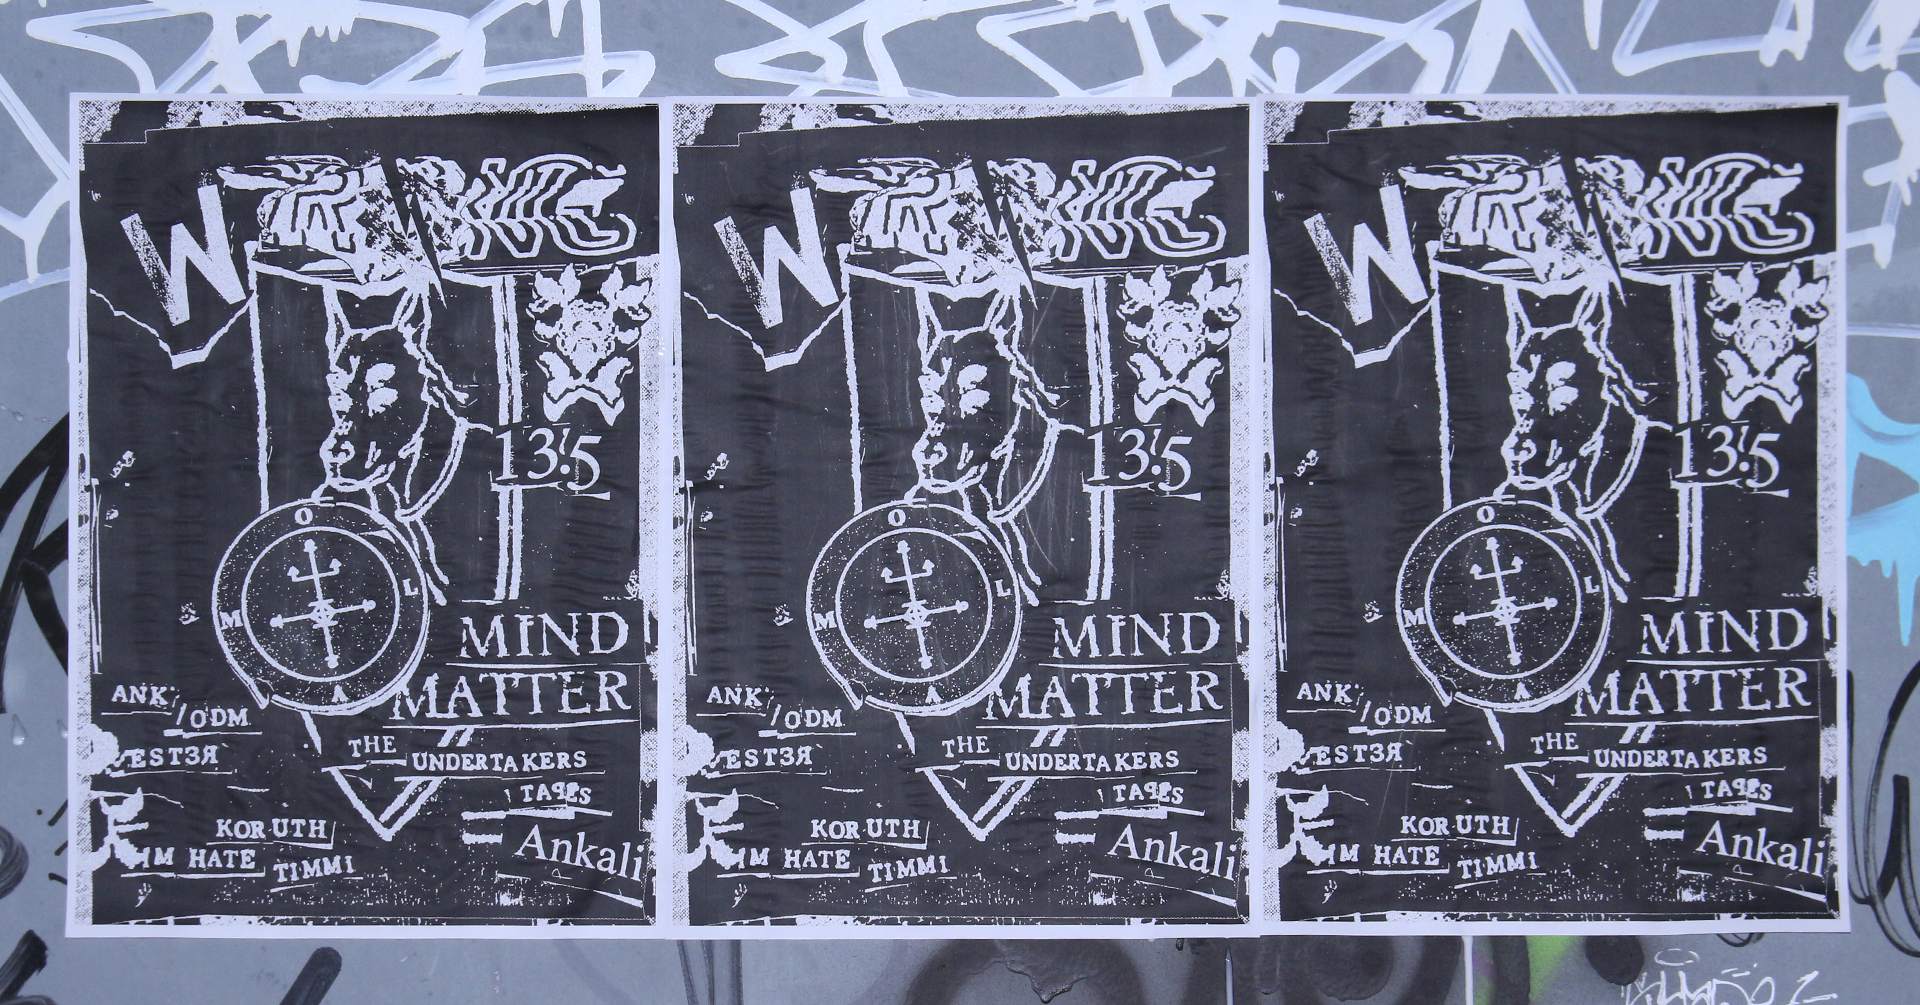 Wrong x OLAM: MIND I MATTER, ANK, ODM, Ester, The Undertaker's Tapes, Opioid Slot Machine - フライヤー表